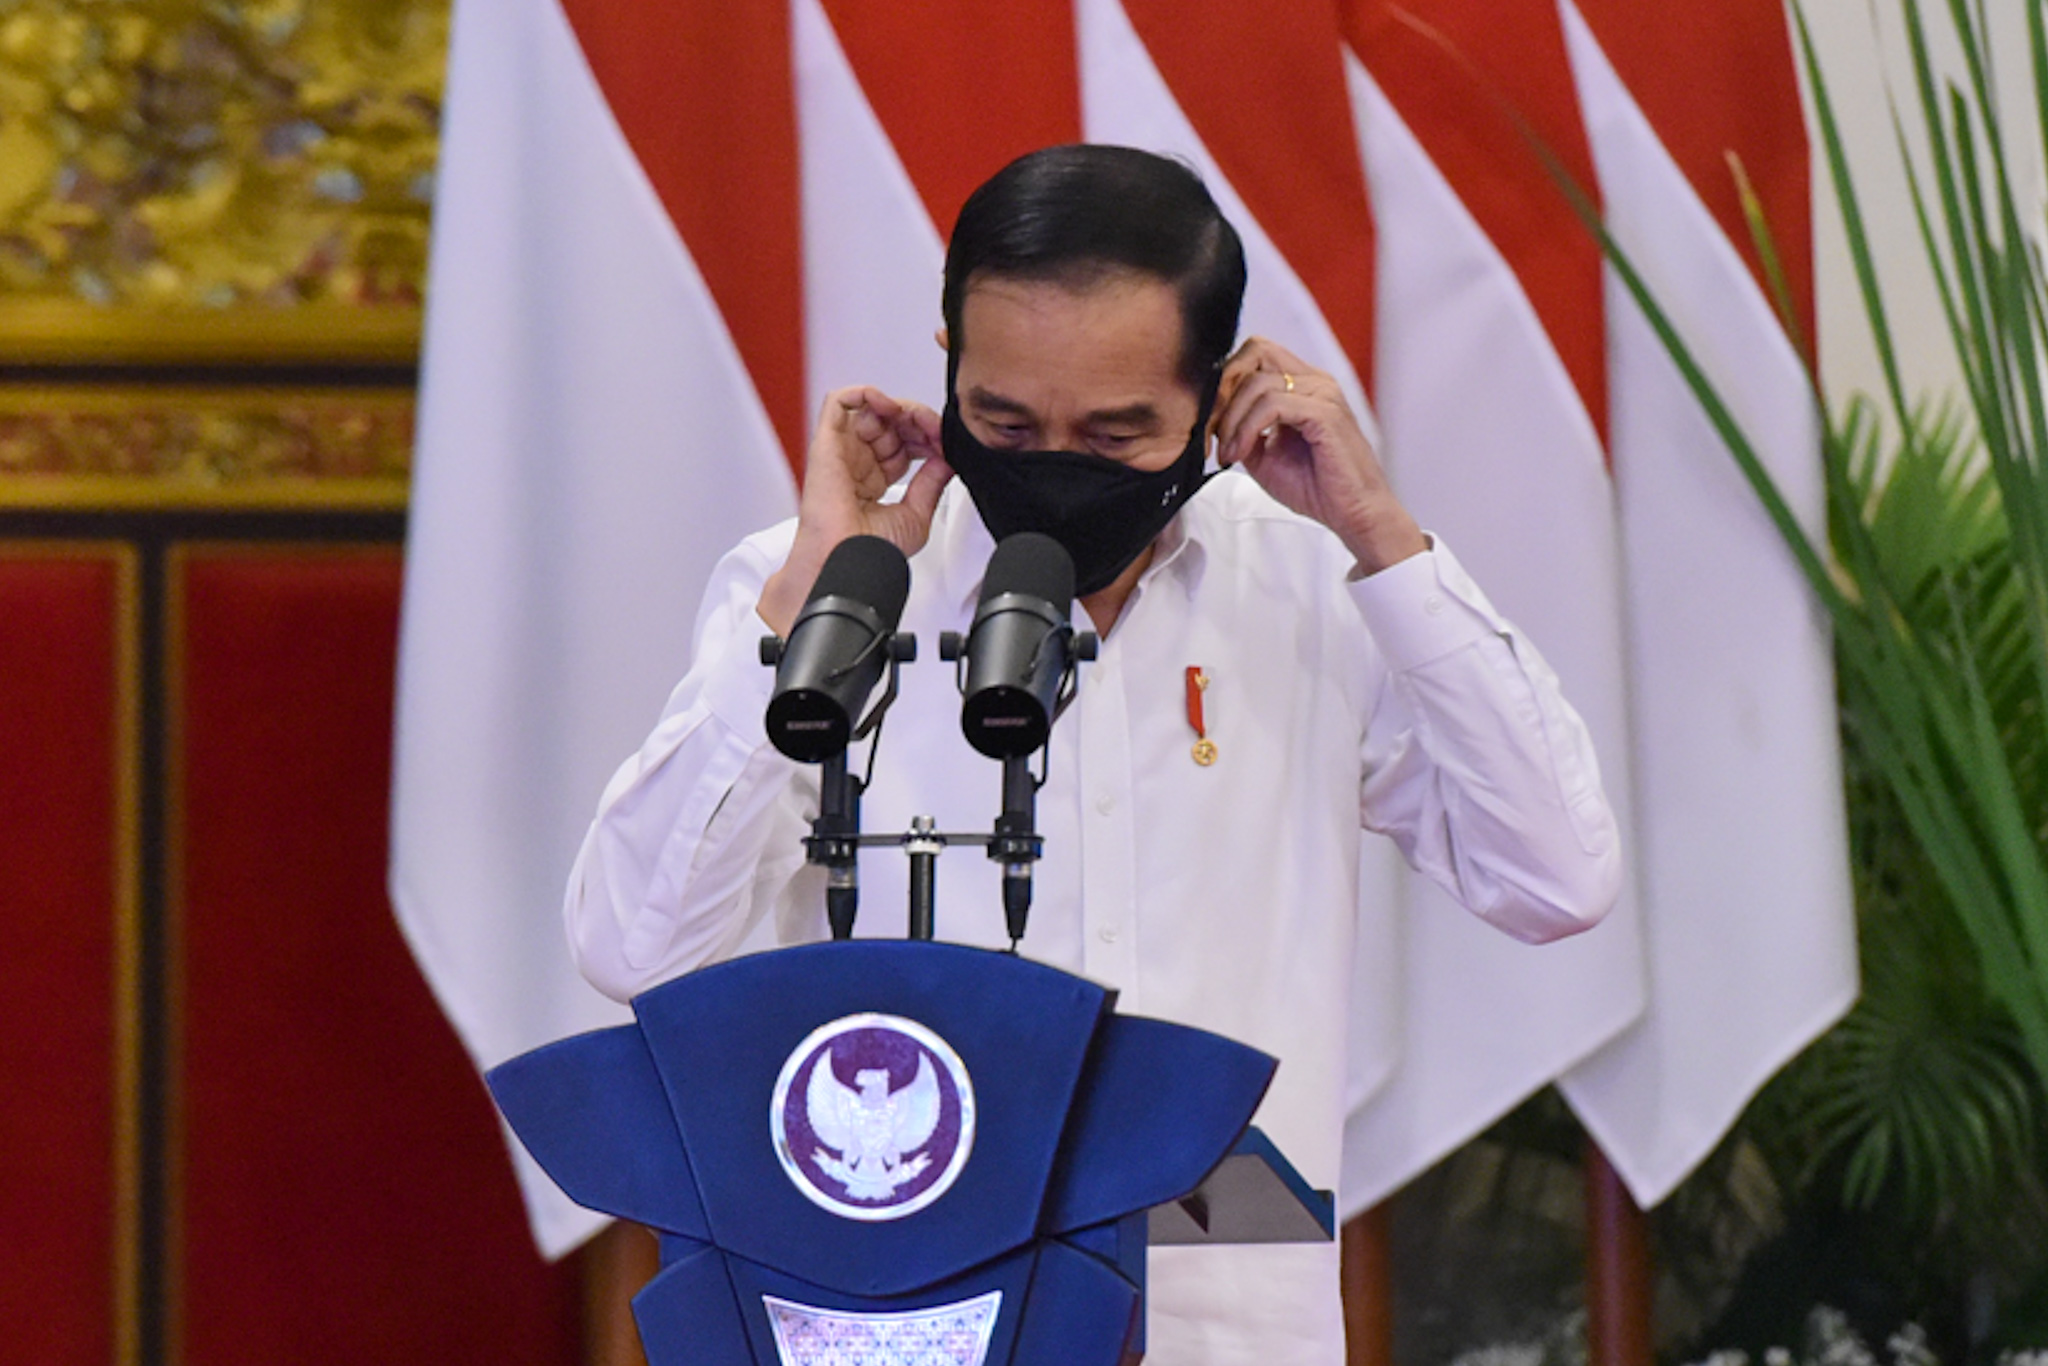 COVID-19 – Indonesian president to get first vaccine shot on Jan. 13